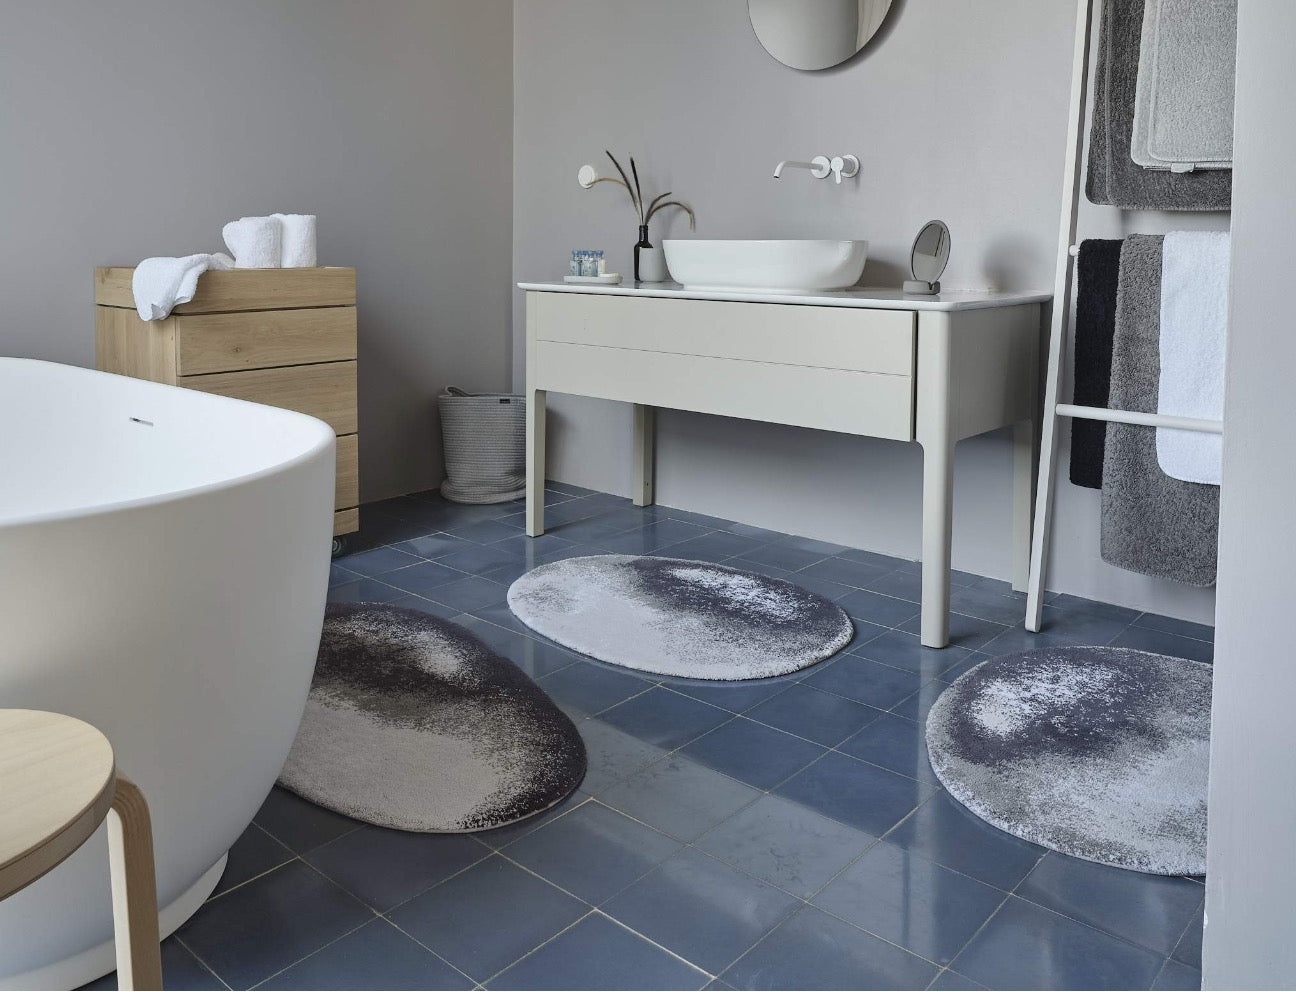 https://cdn.shopify.com/s/files/1/1268/4551/t/71/assets/abyss_and_habidecor_stone_bath_rug_fig_linens_and_home_difference_between_bath_rug_and_bath_mat-1686591766644.jpg?v=1686591767